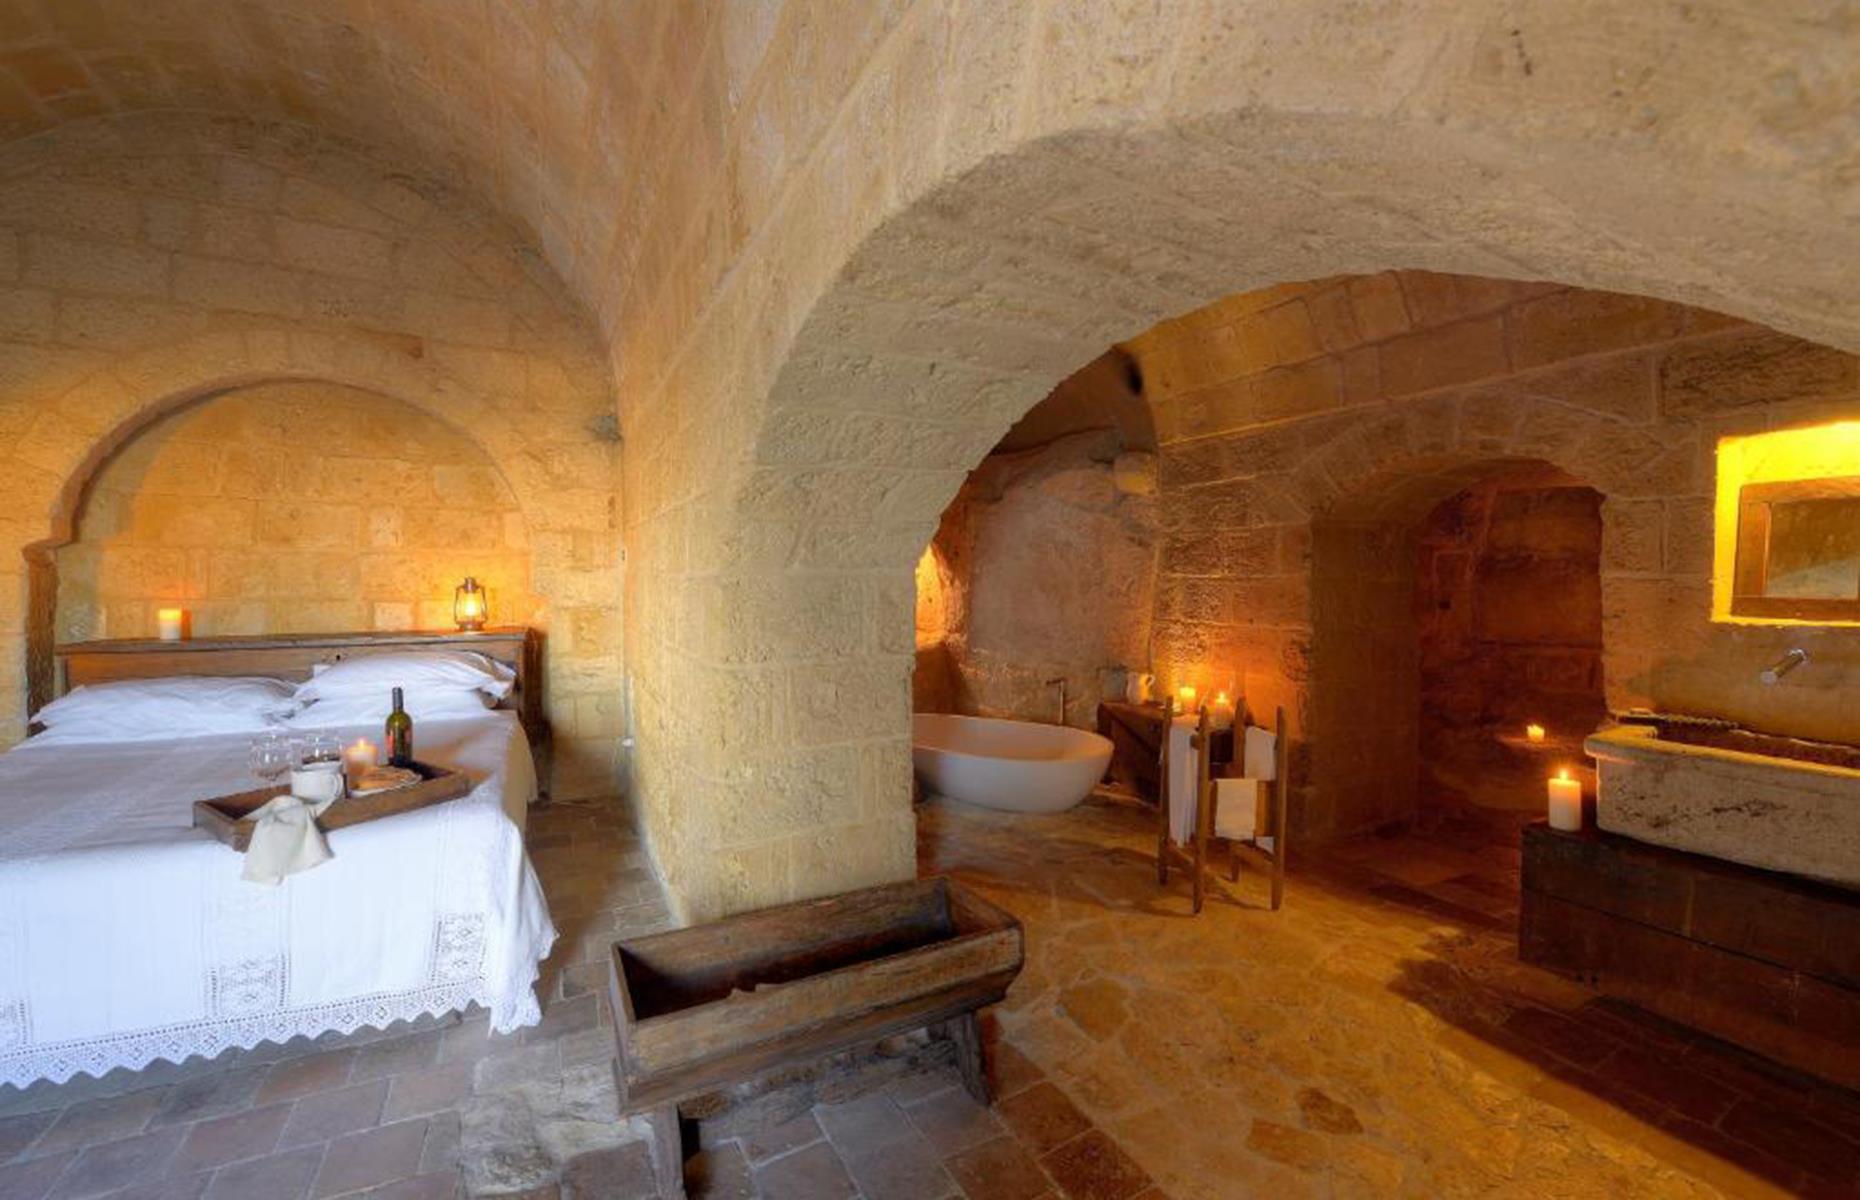 <p>Another Matera hotel, the stunning, candle-lit caves of Sextantio Le Grotte della Civita have been restored from abandoned ancient dwellings. A luxury retreat with a twist, the architecture retains its original shape and materials, but now comes with trappings of modern luxury like cosy king beds, bathtubs and hand-woven sheets. The rooms are set in the oldest parts of the complex, while a former church is now a restaurant perfect for romantic dinners. You can even join a cooking course to learn the art of pasta making – including how to make regional shapes like cavatelli and orecchiette.</p>